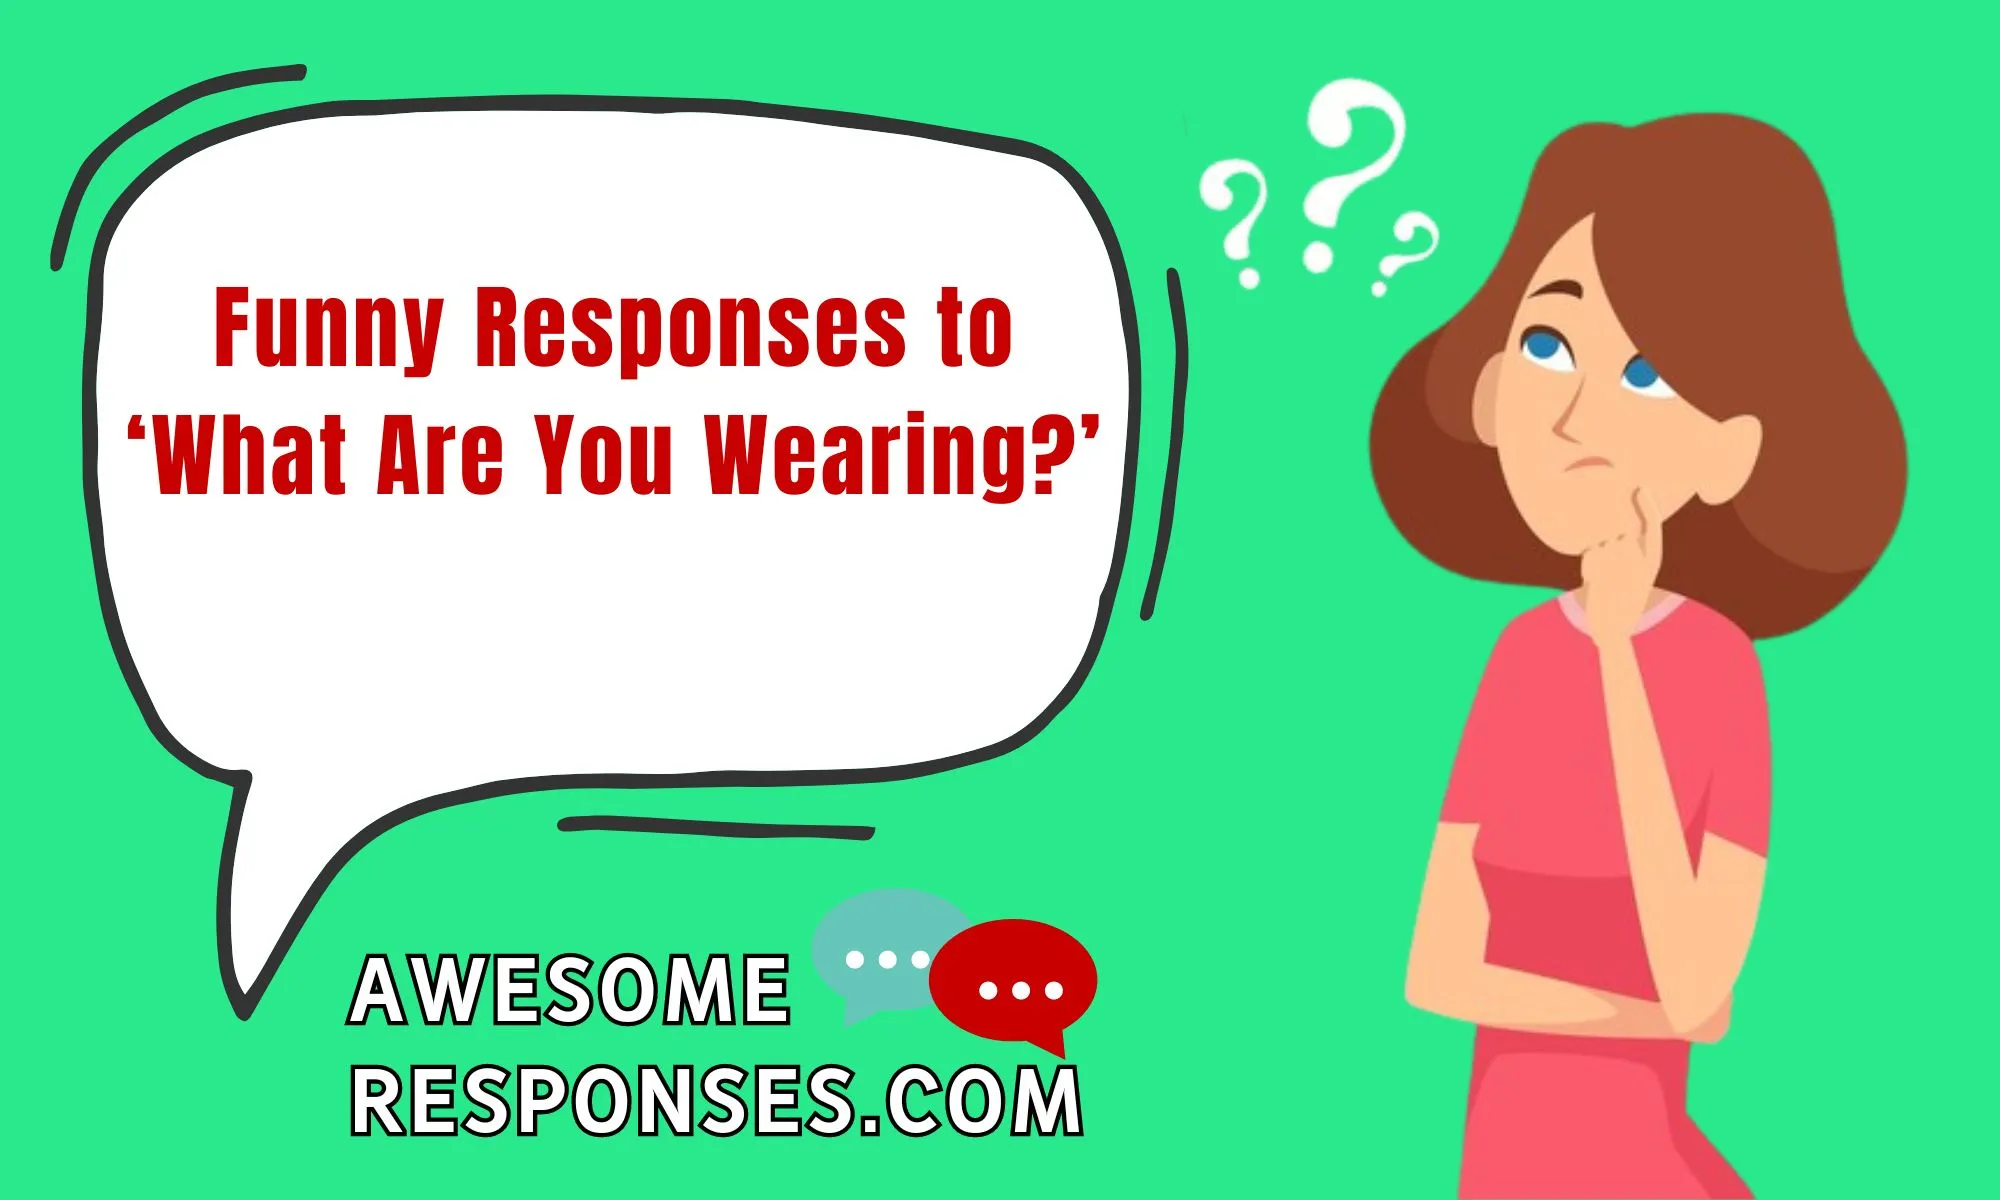 Funny Responses to ‘What Are You Wearing?’